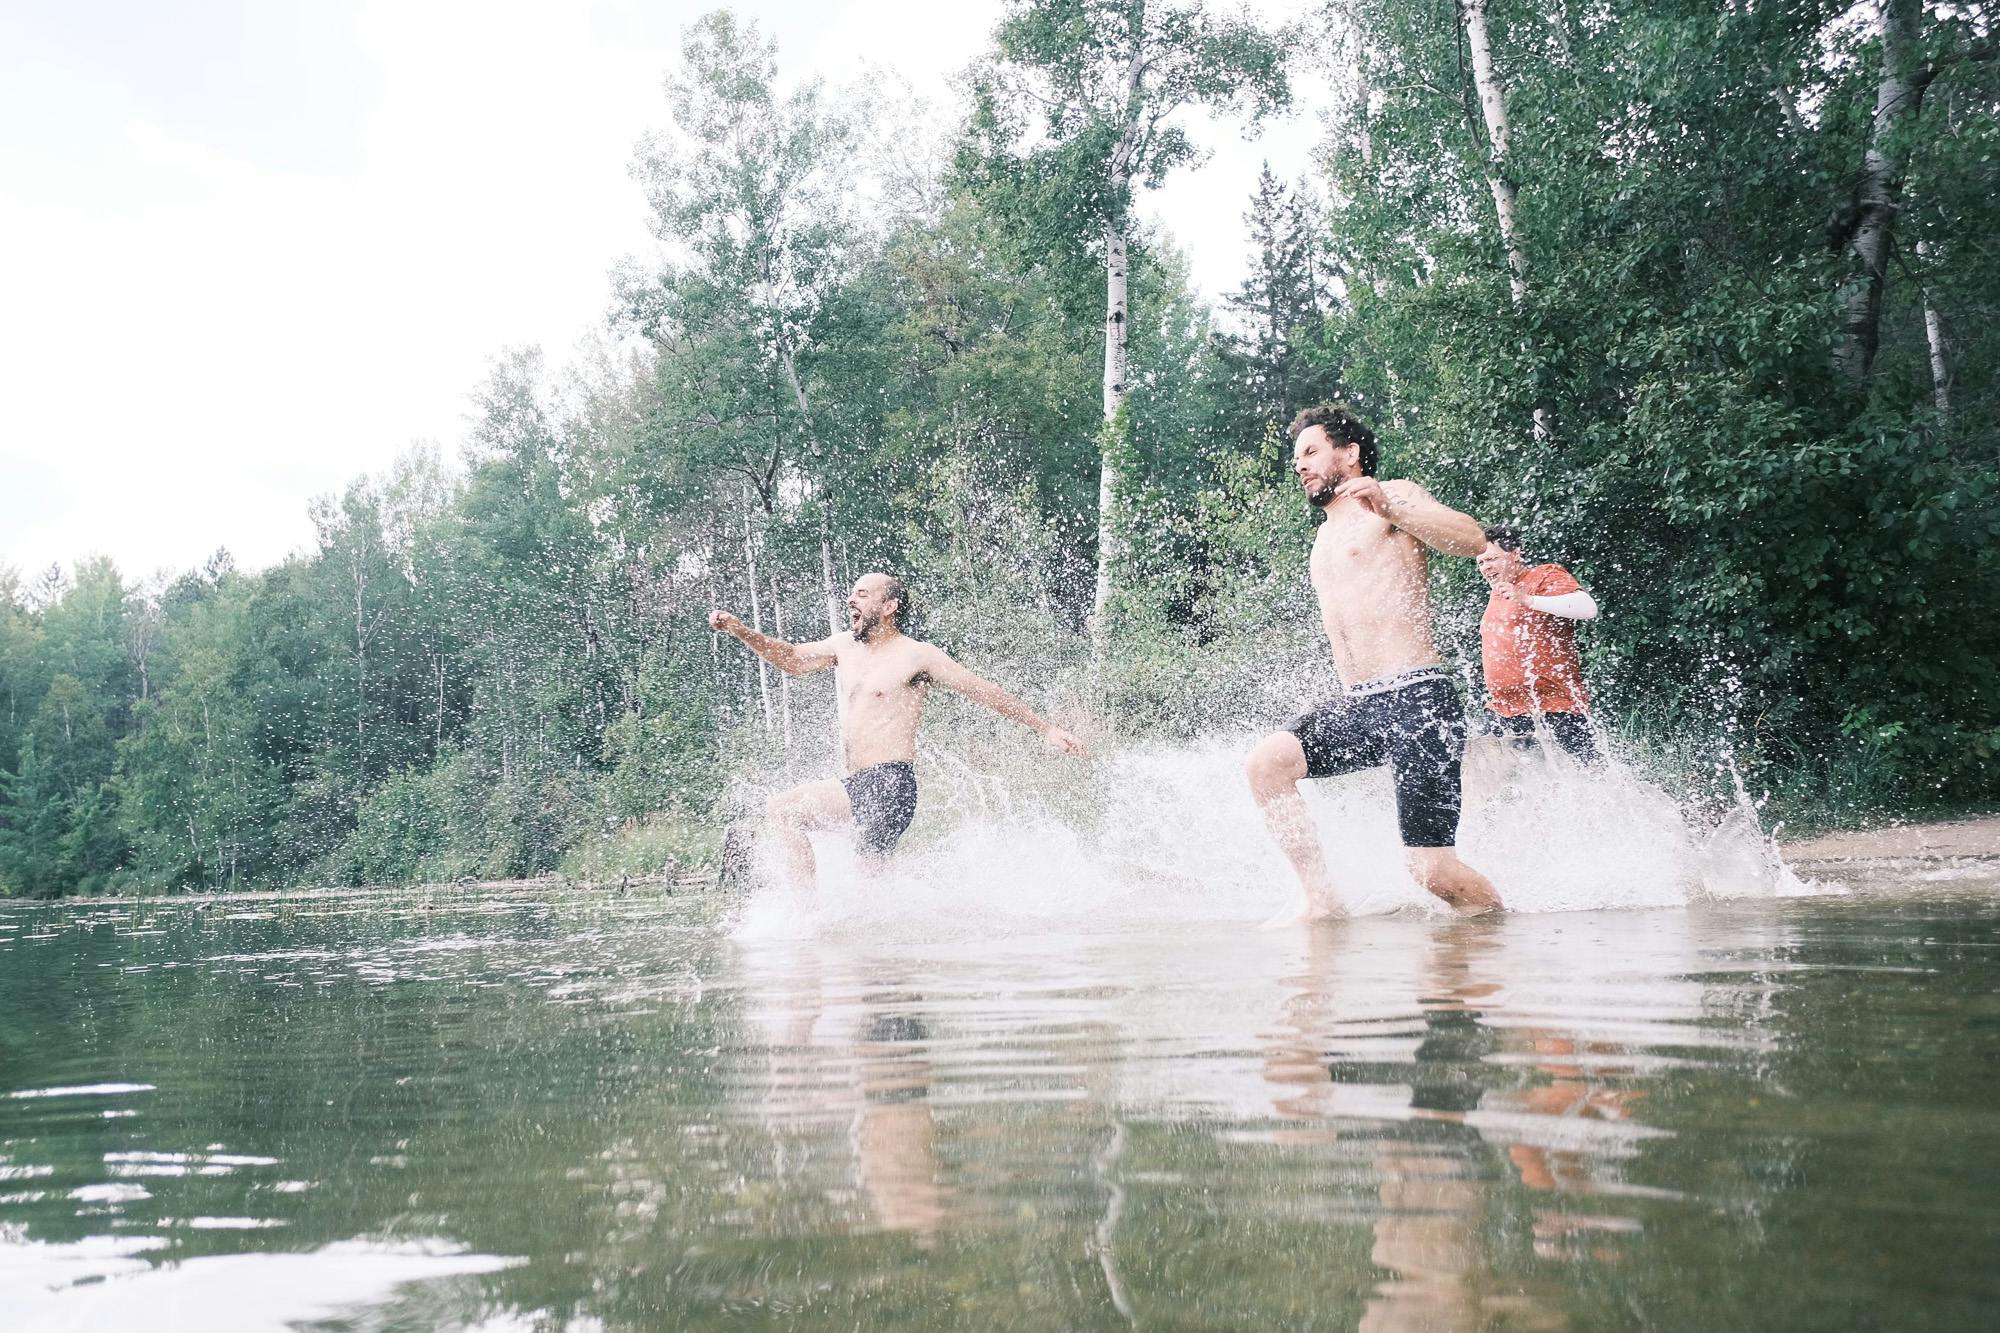 Friends jumping in a lake.